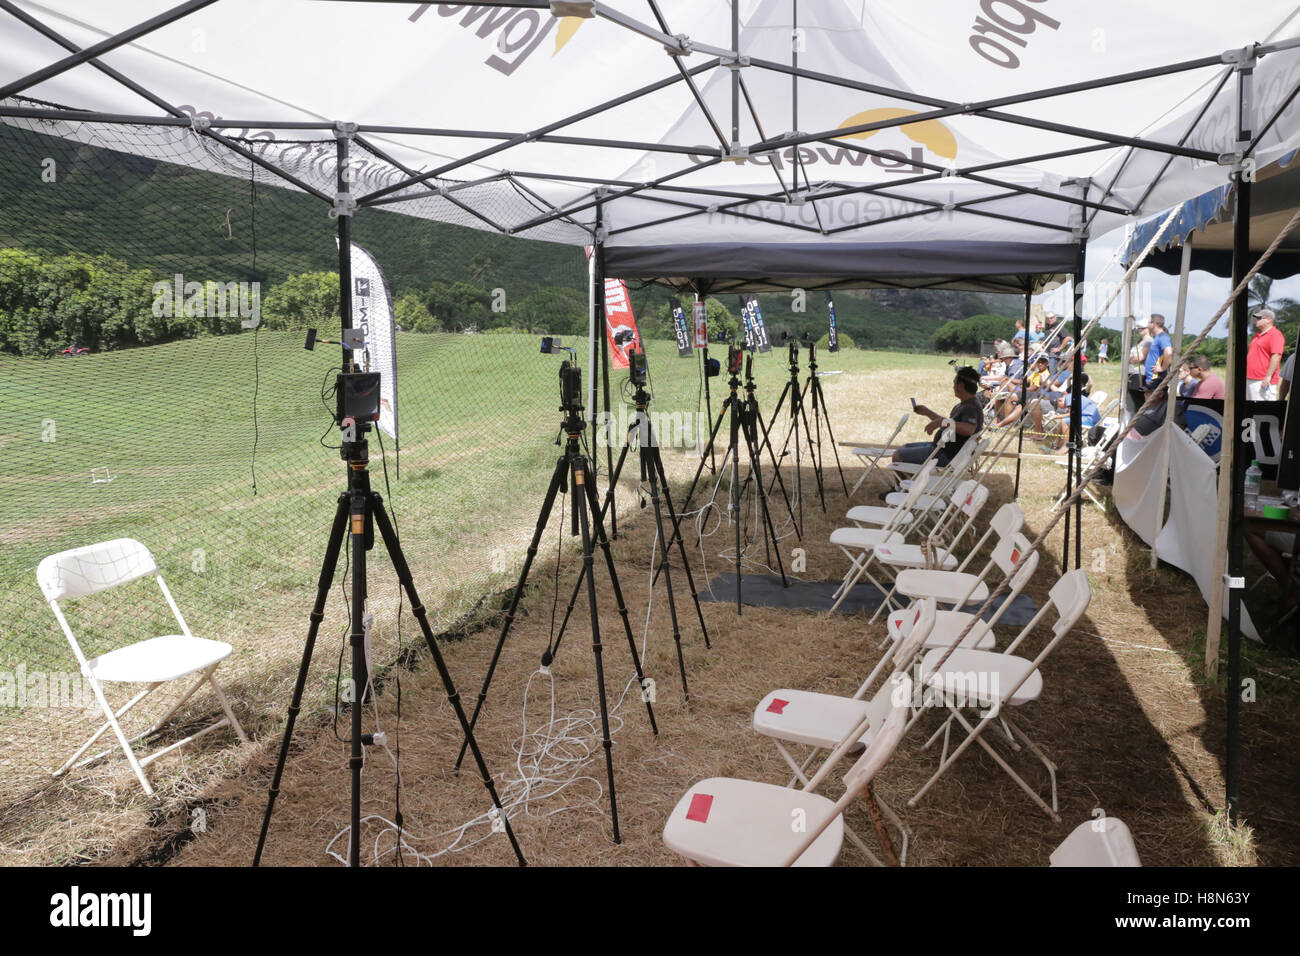 Drone Worlds 2016.  Drone racing competition, 2016.  Held on Koaloa ranch, O'hau island, Hawaii.  Pictured: The flightline Stock Photo